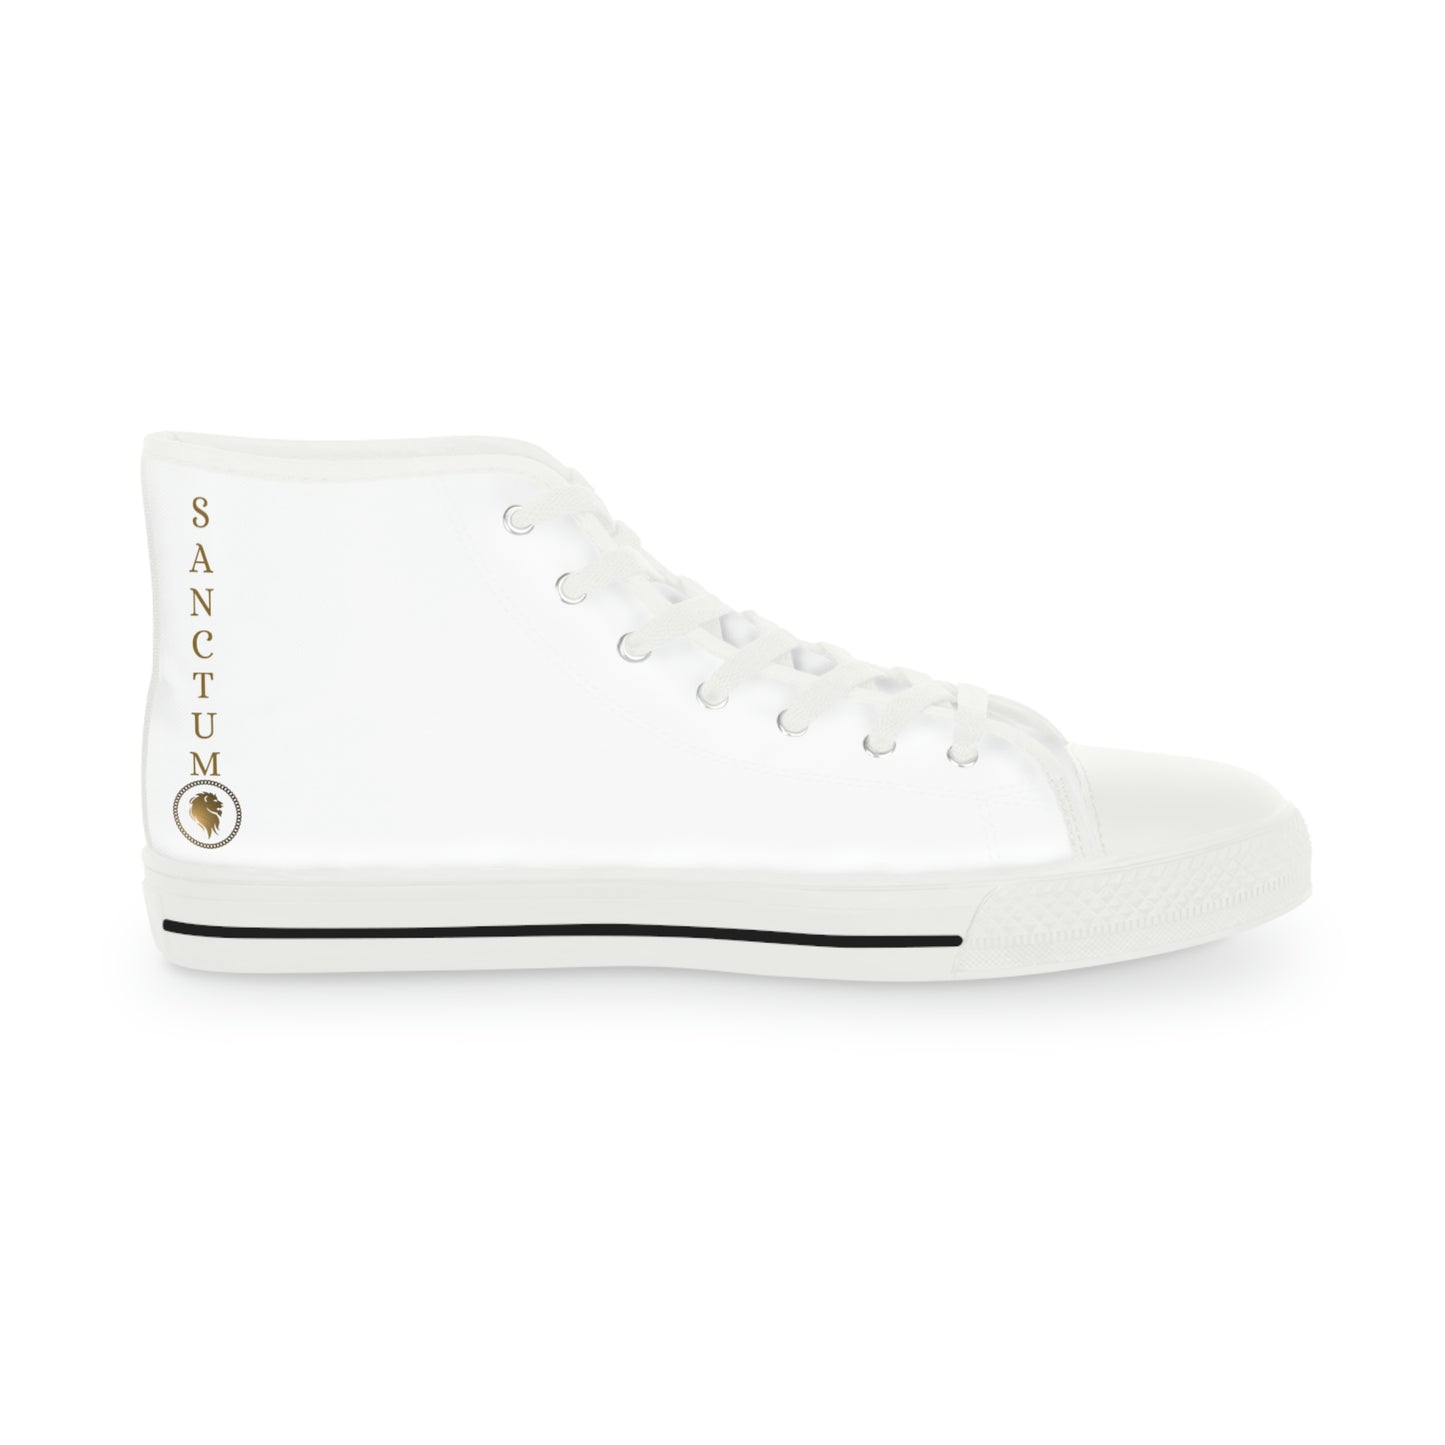 White/Gold Men's High Top Sneakers